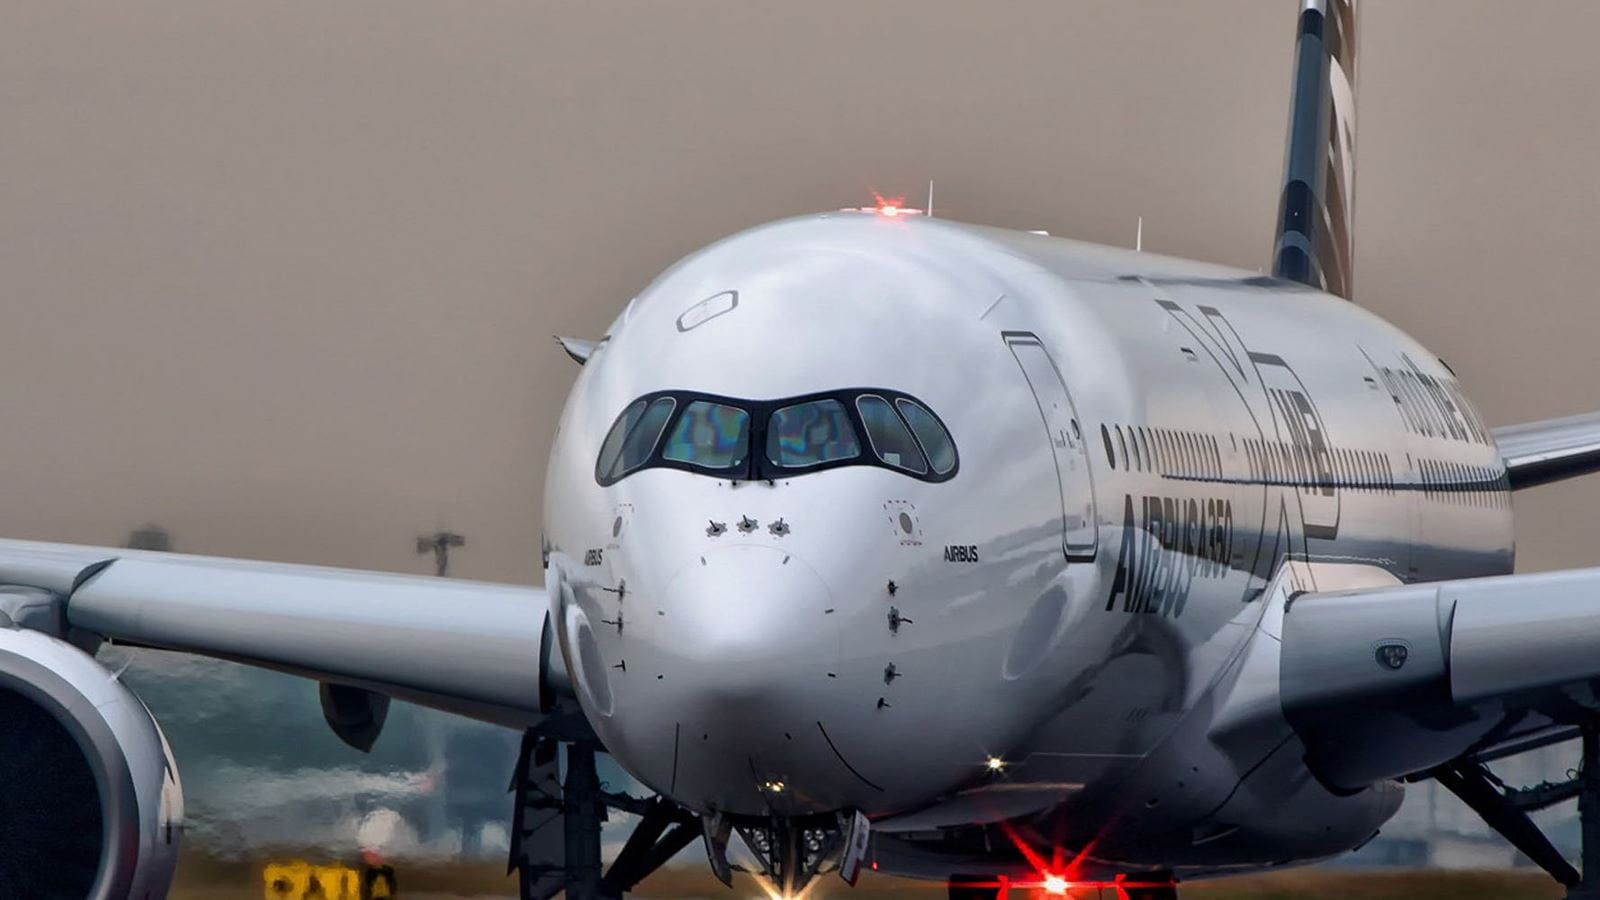 close up photo of the nose of an airplane